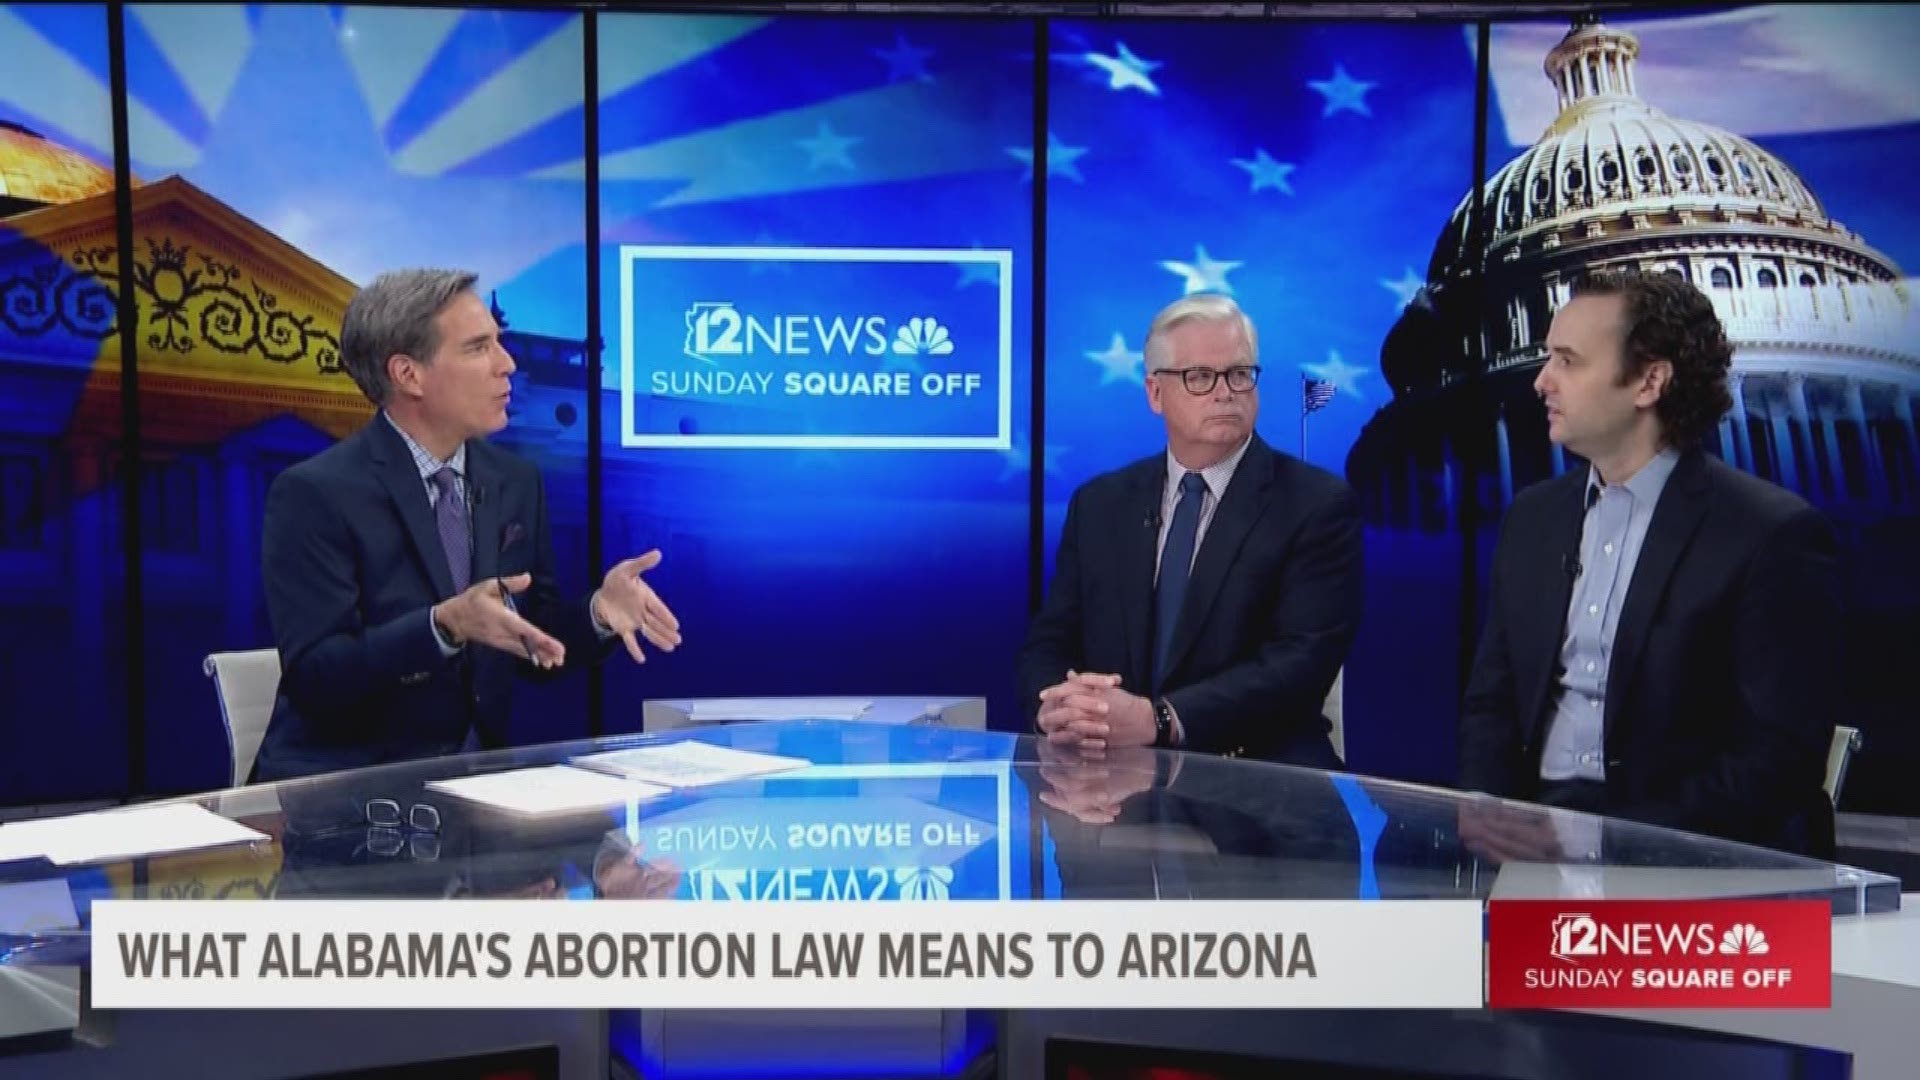 Watch the full Sunday Square Off from May 19, 2019 here. This week's topics include "What Alabama's abortion law means to Arizona," "What do Arizona Democrats want in the state budget," "Arizona inmates get prison medical bills," and "Arizona could be hit harder by tariffs."